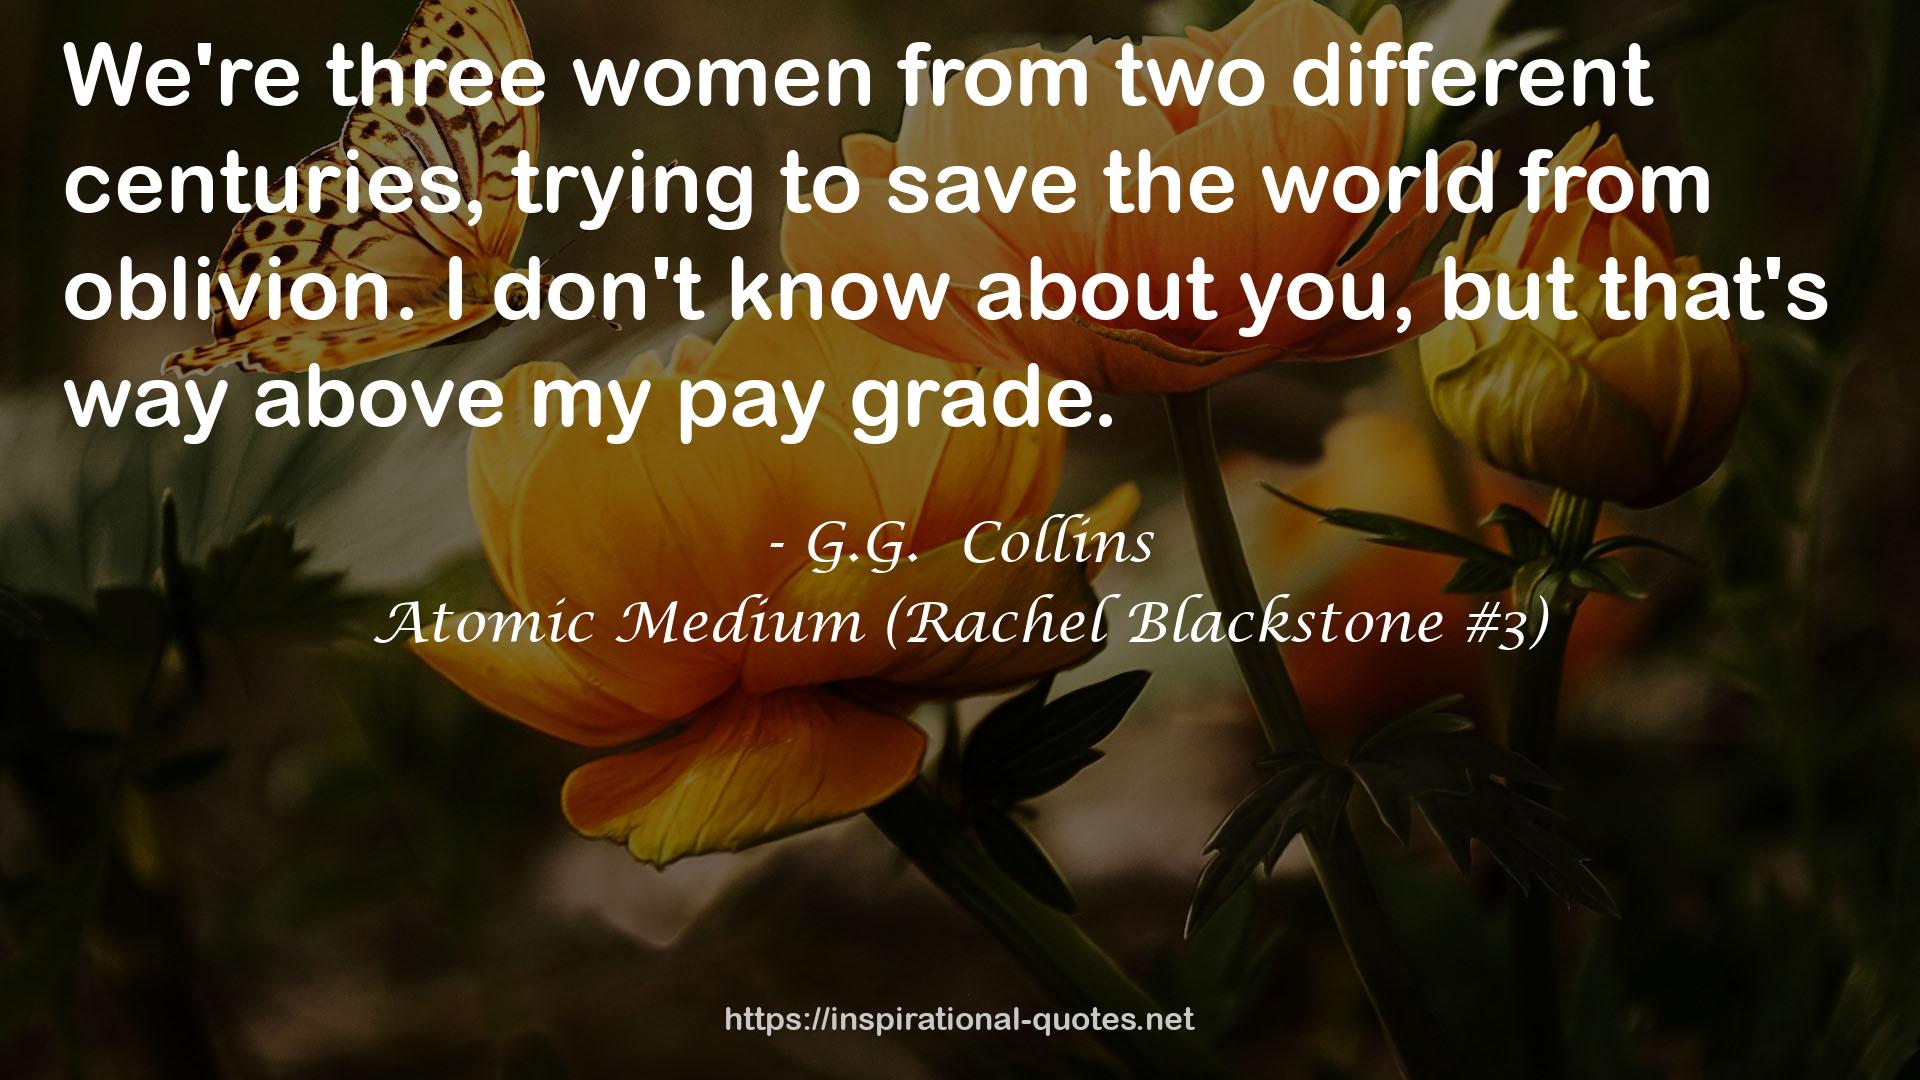 G.G.  Collins QUOTES